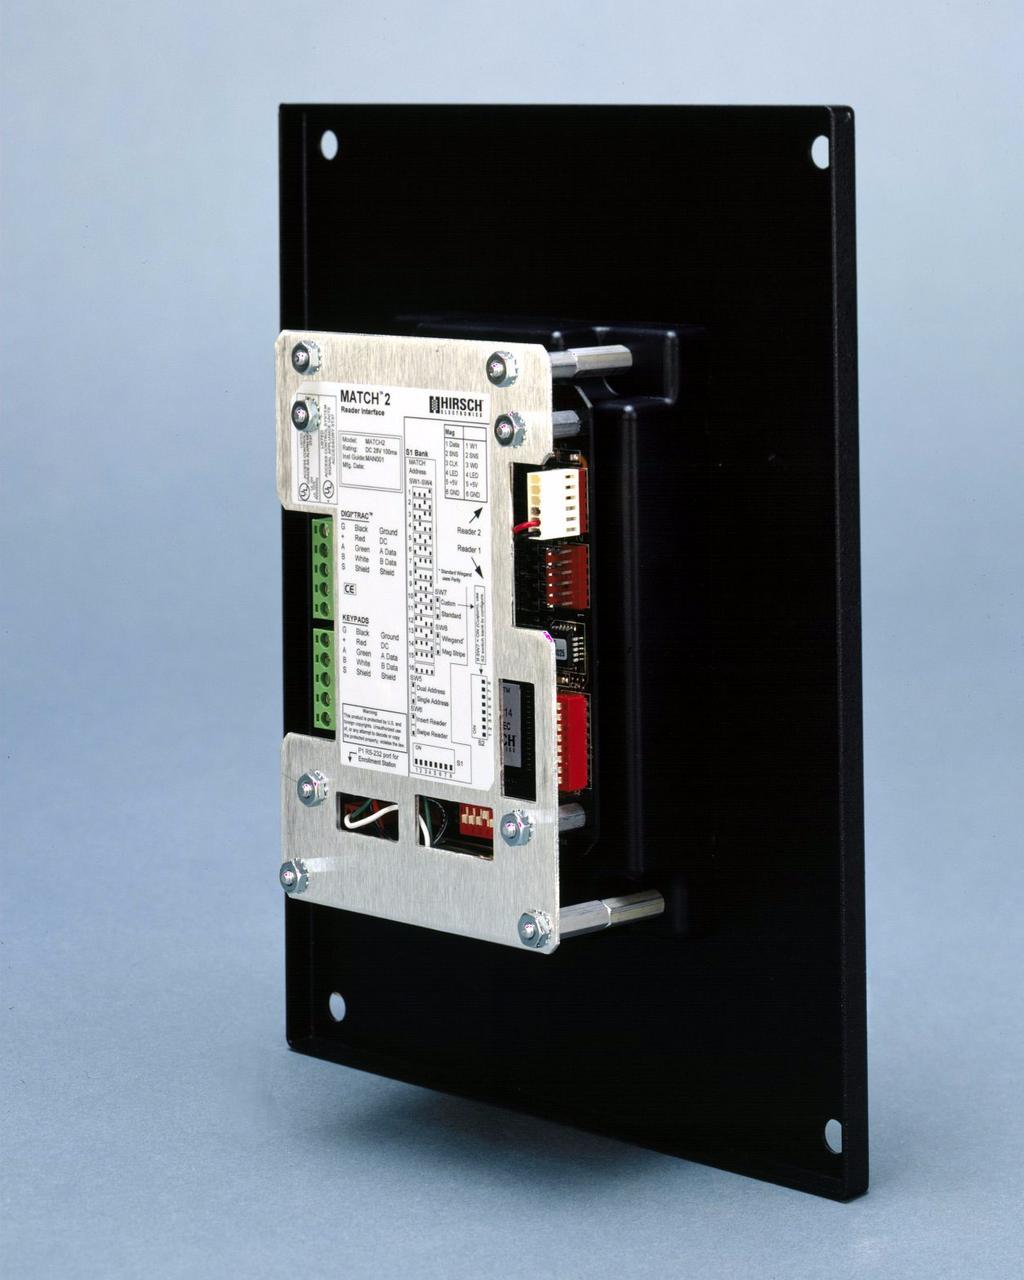 DTA001-0602 Introduction The DIGI*TRAC Annunciator (DTA) is used to monitor basic security functions such as alarm, input, and relay status.